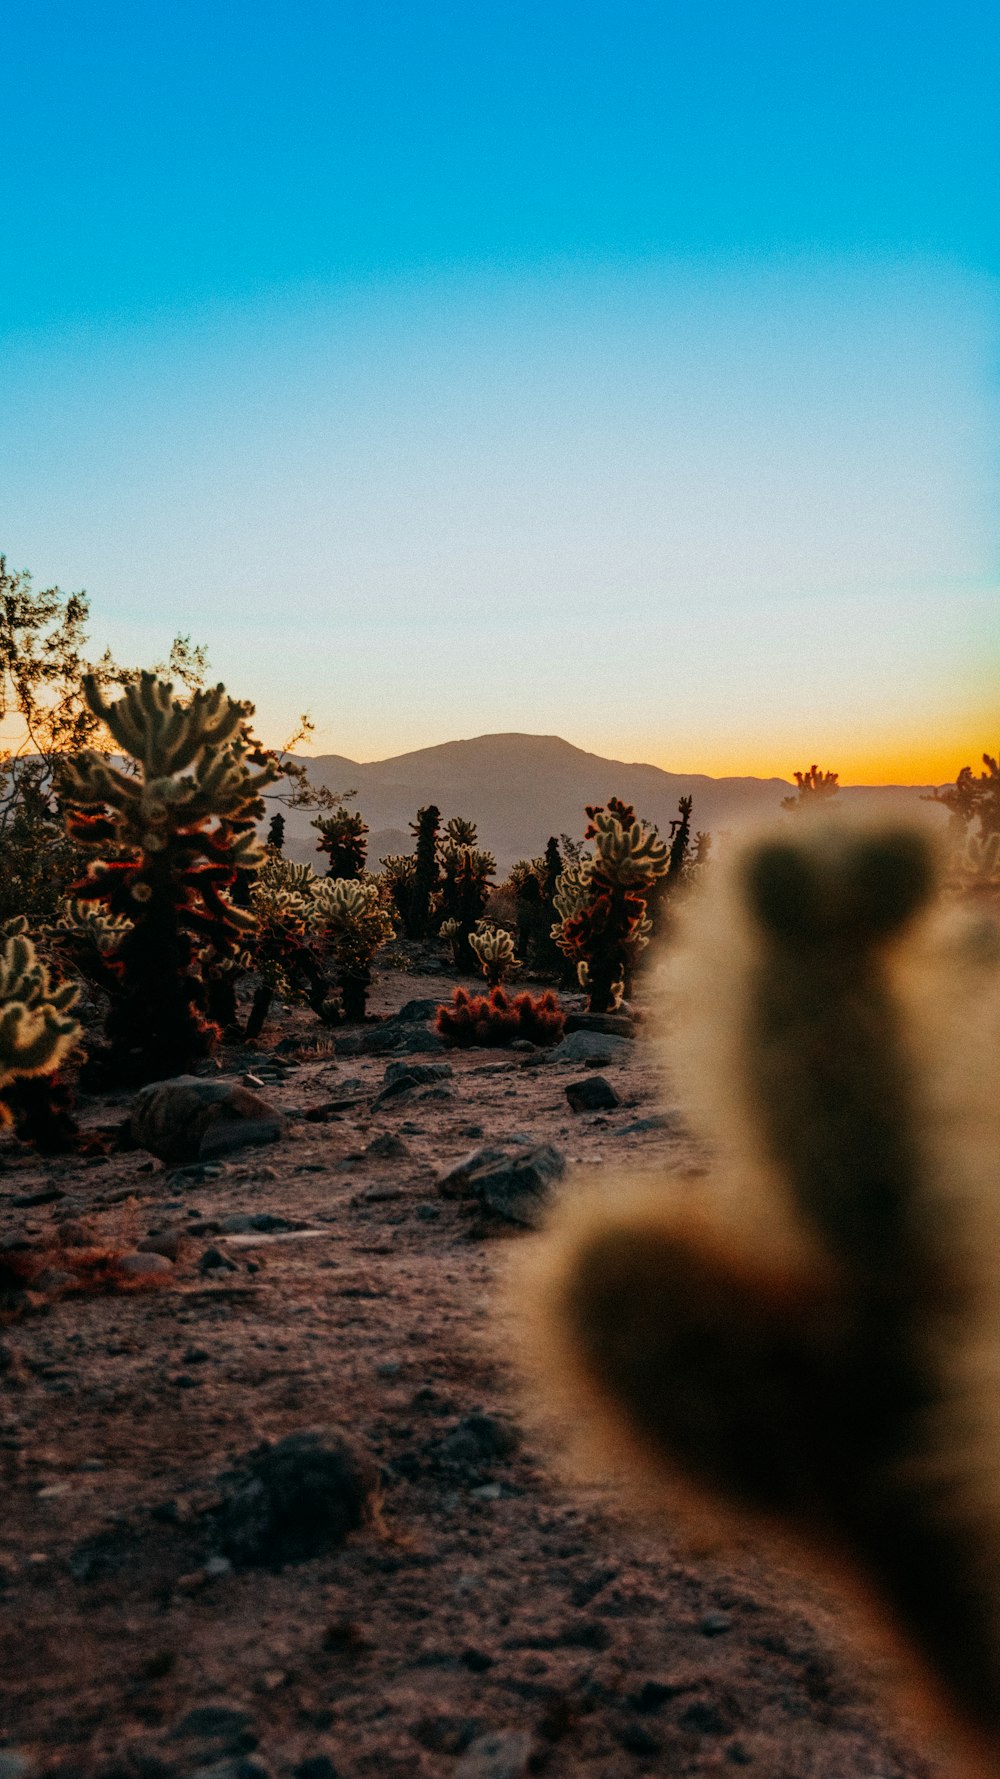 a cactus in the foreground with mountains in the background